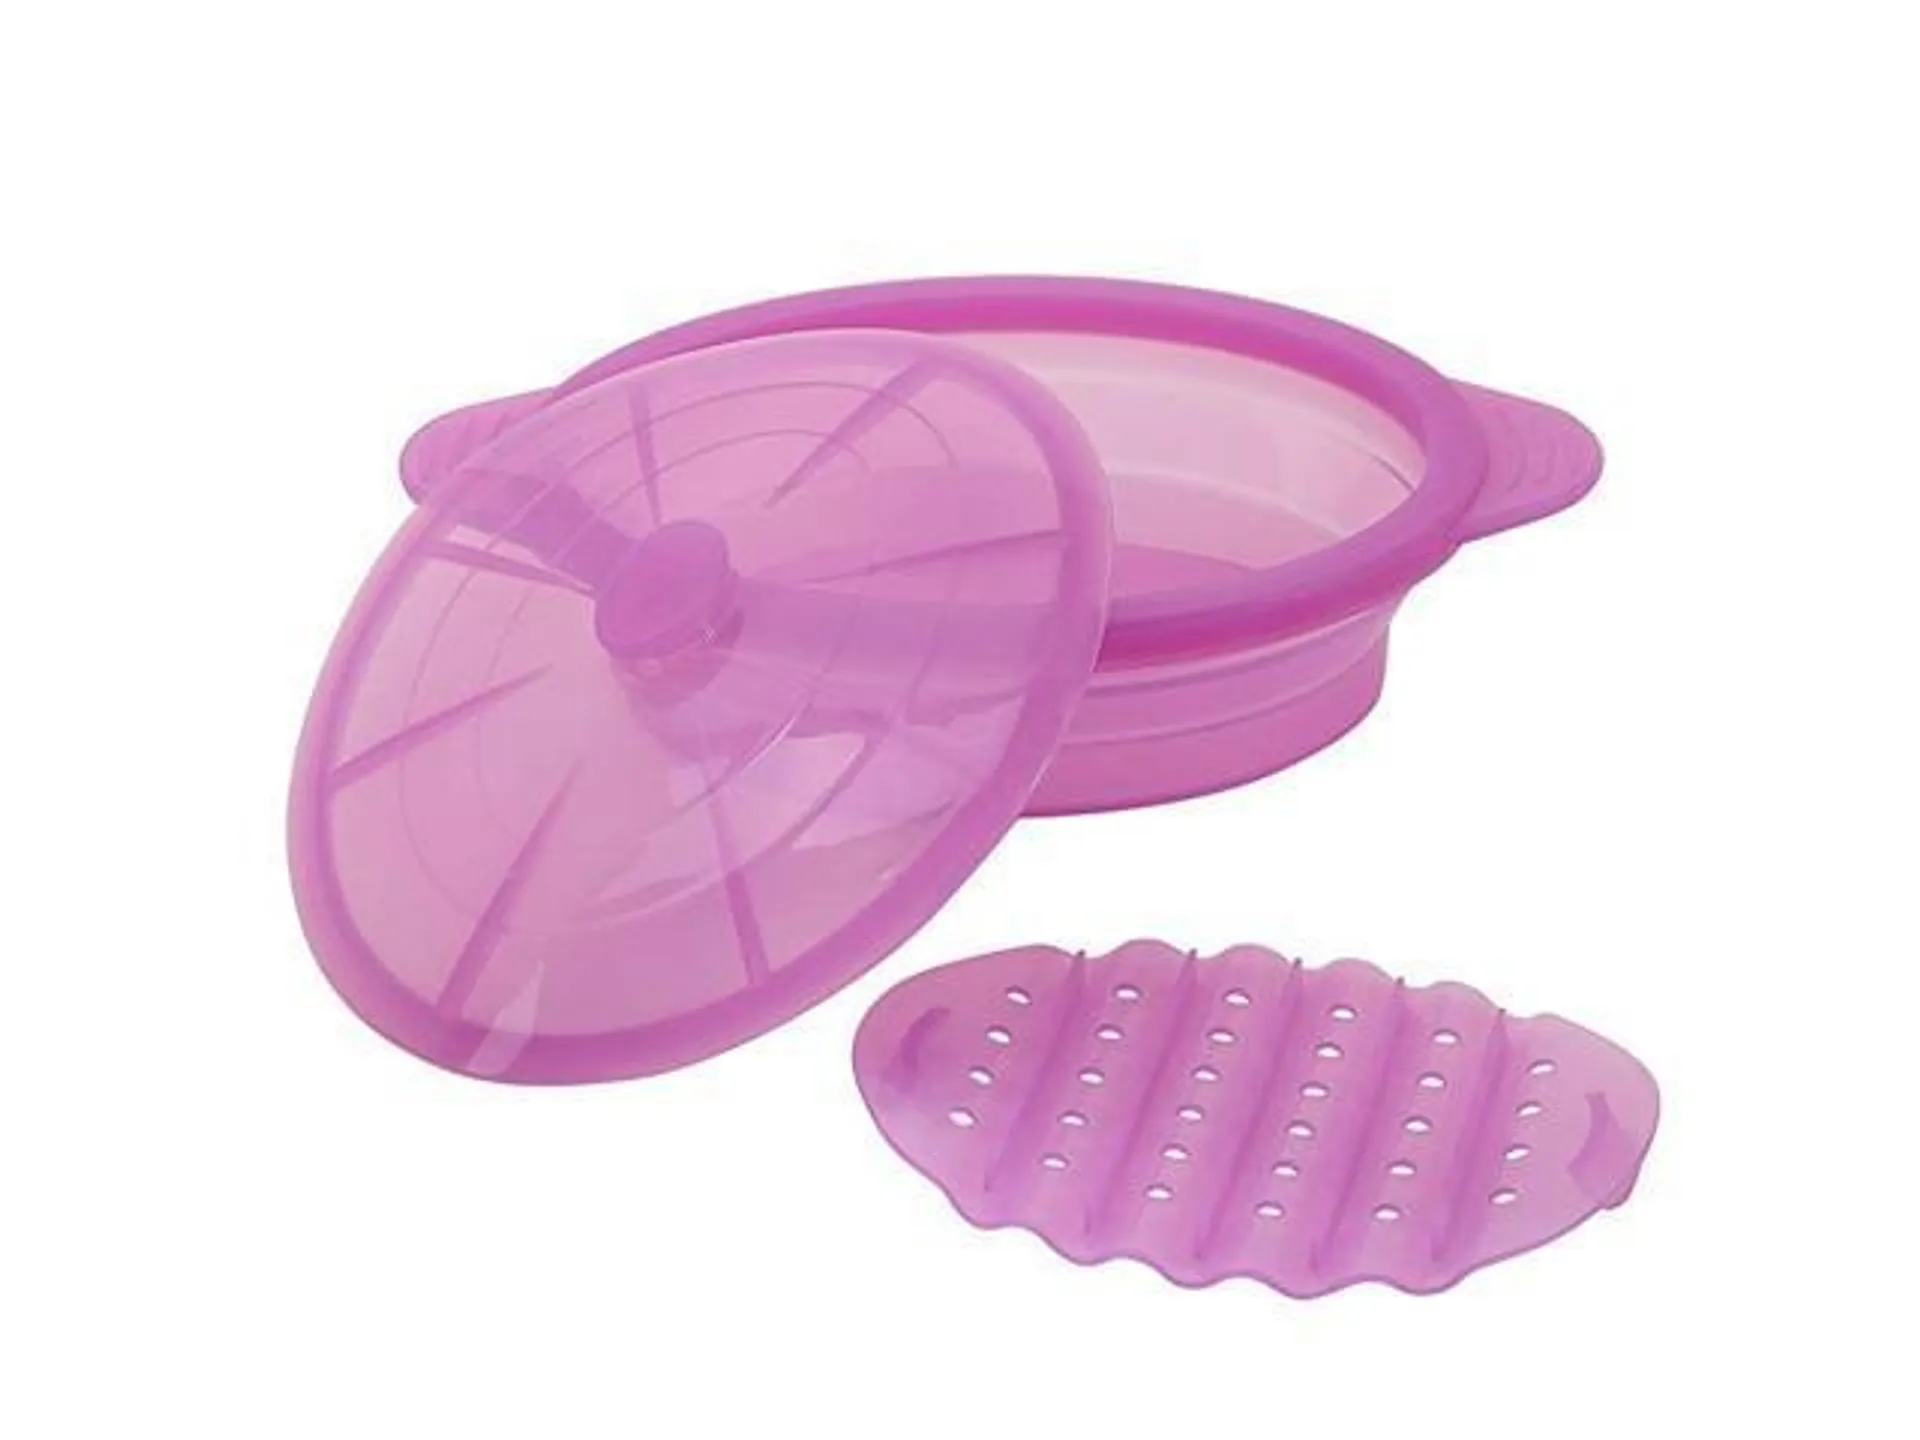 Steamer Collapsible Bowl-Silicone Steamer with Handle & Lid for Meal Prep with Detachable Partition, Easy to Store, BPA Free，Cookware, Freezer & Dishwasher Safe, Purple